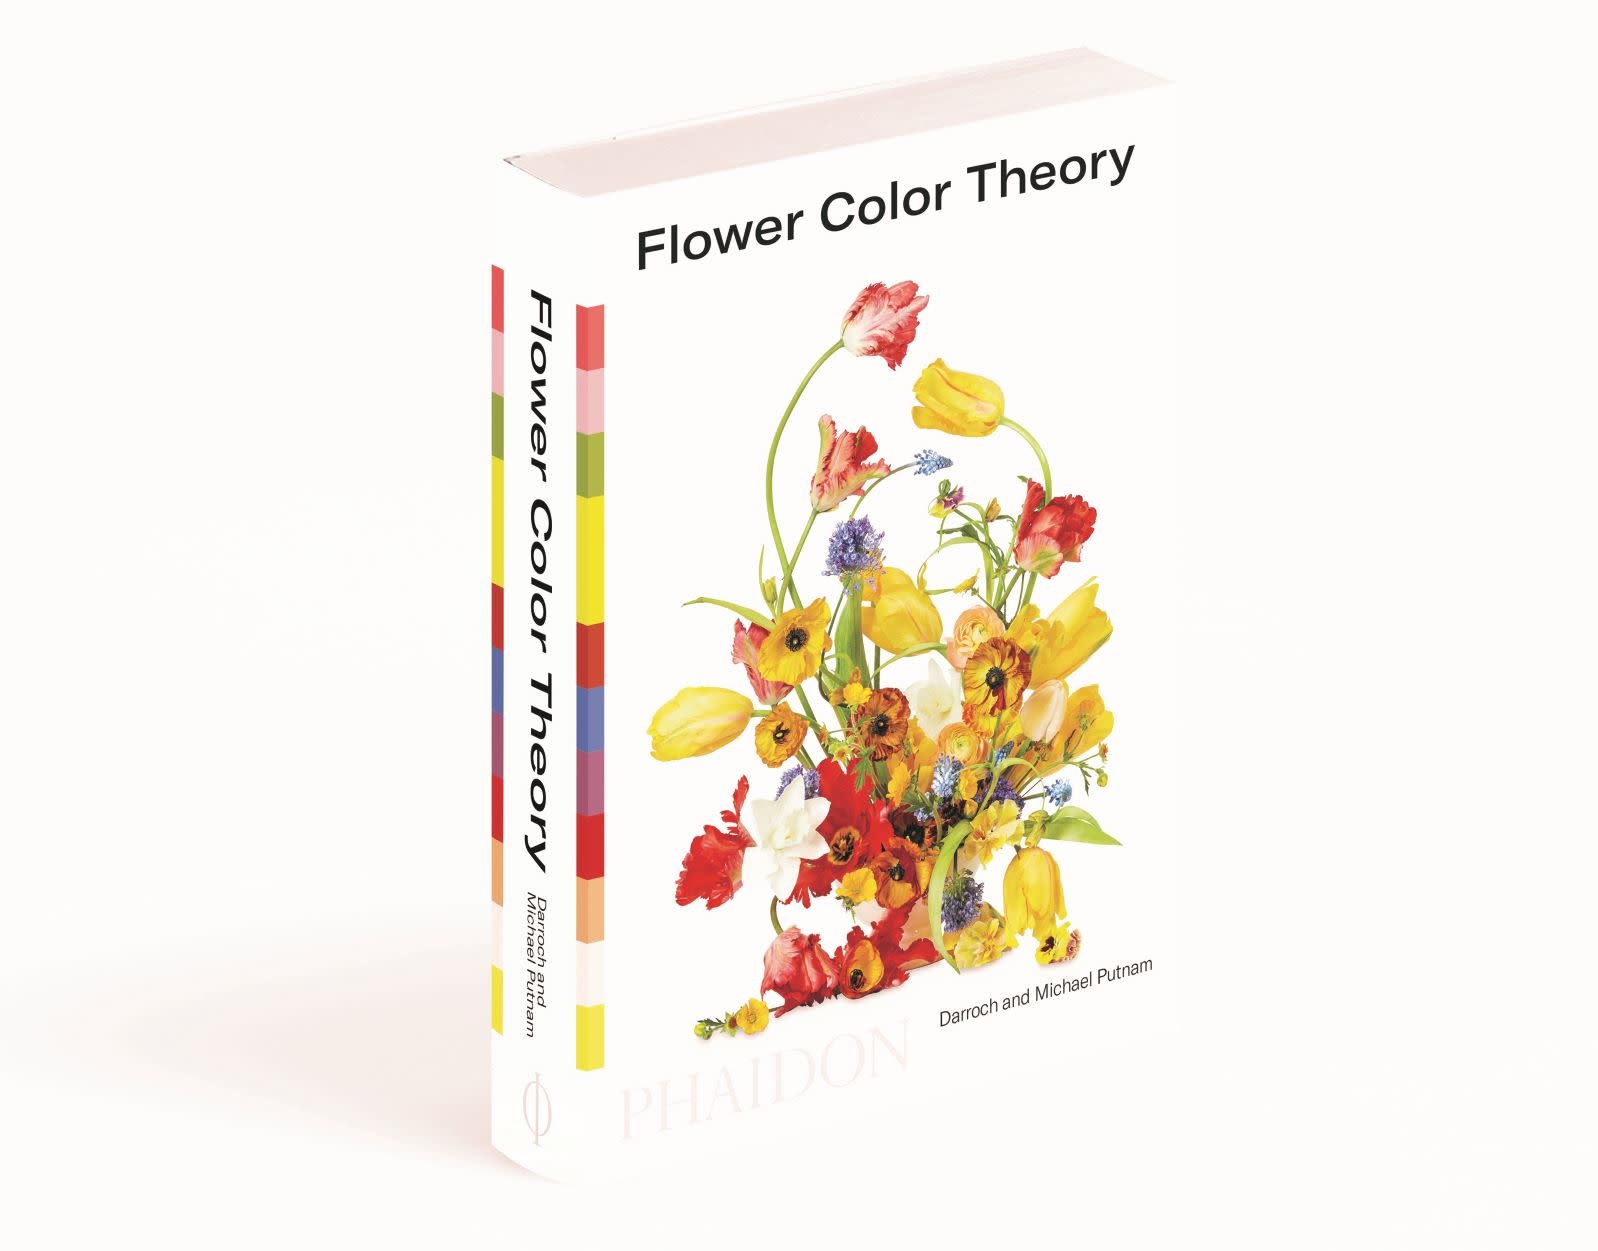 Flower Color Theory [Book]